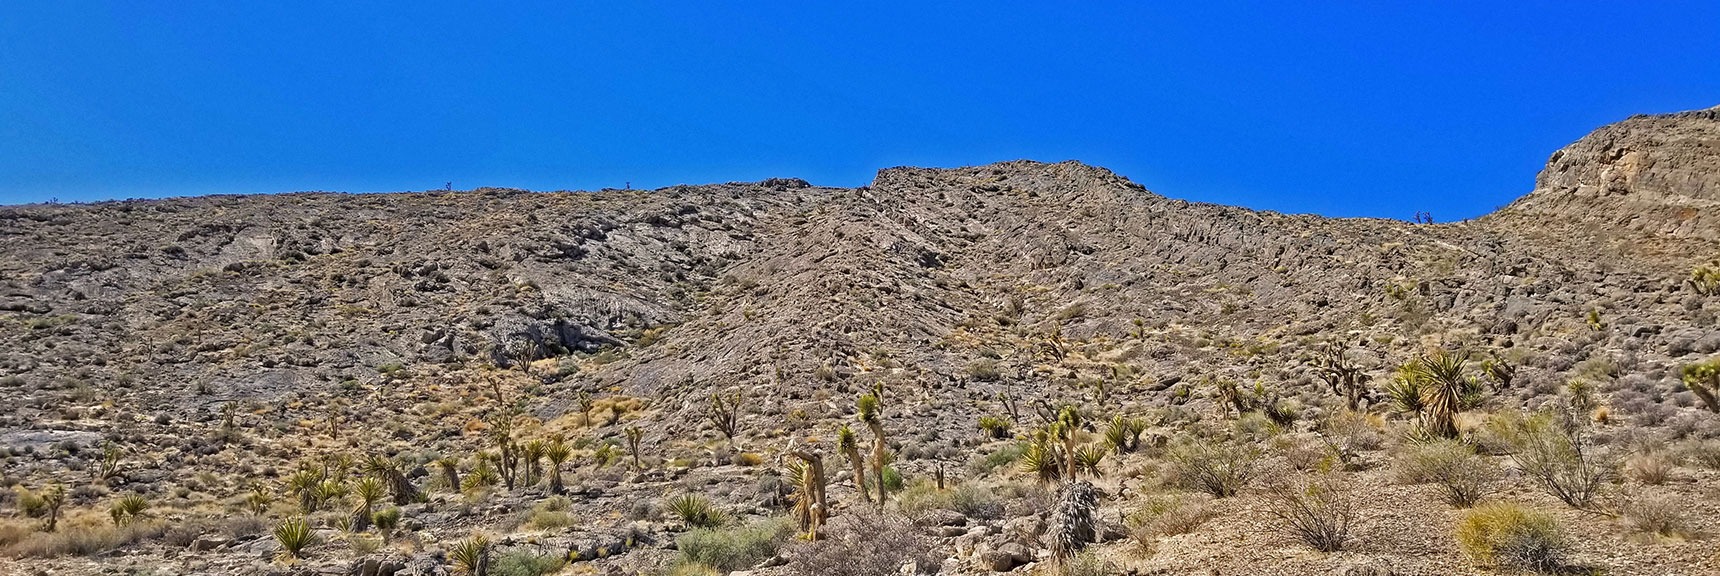 Better View Following Gully in Center of Photo. Will Ascend This Route | Fossil Ridge End to End | Sheep Range | Desert National Wildlife Refuge, Nevada